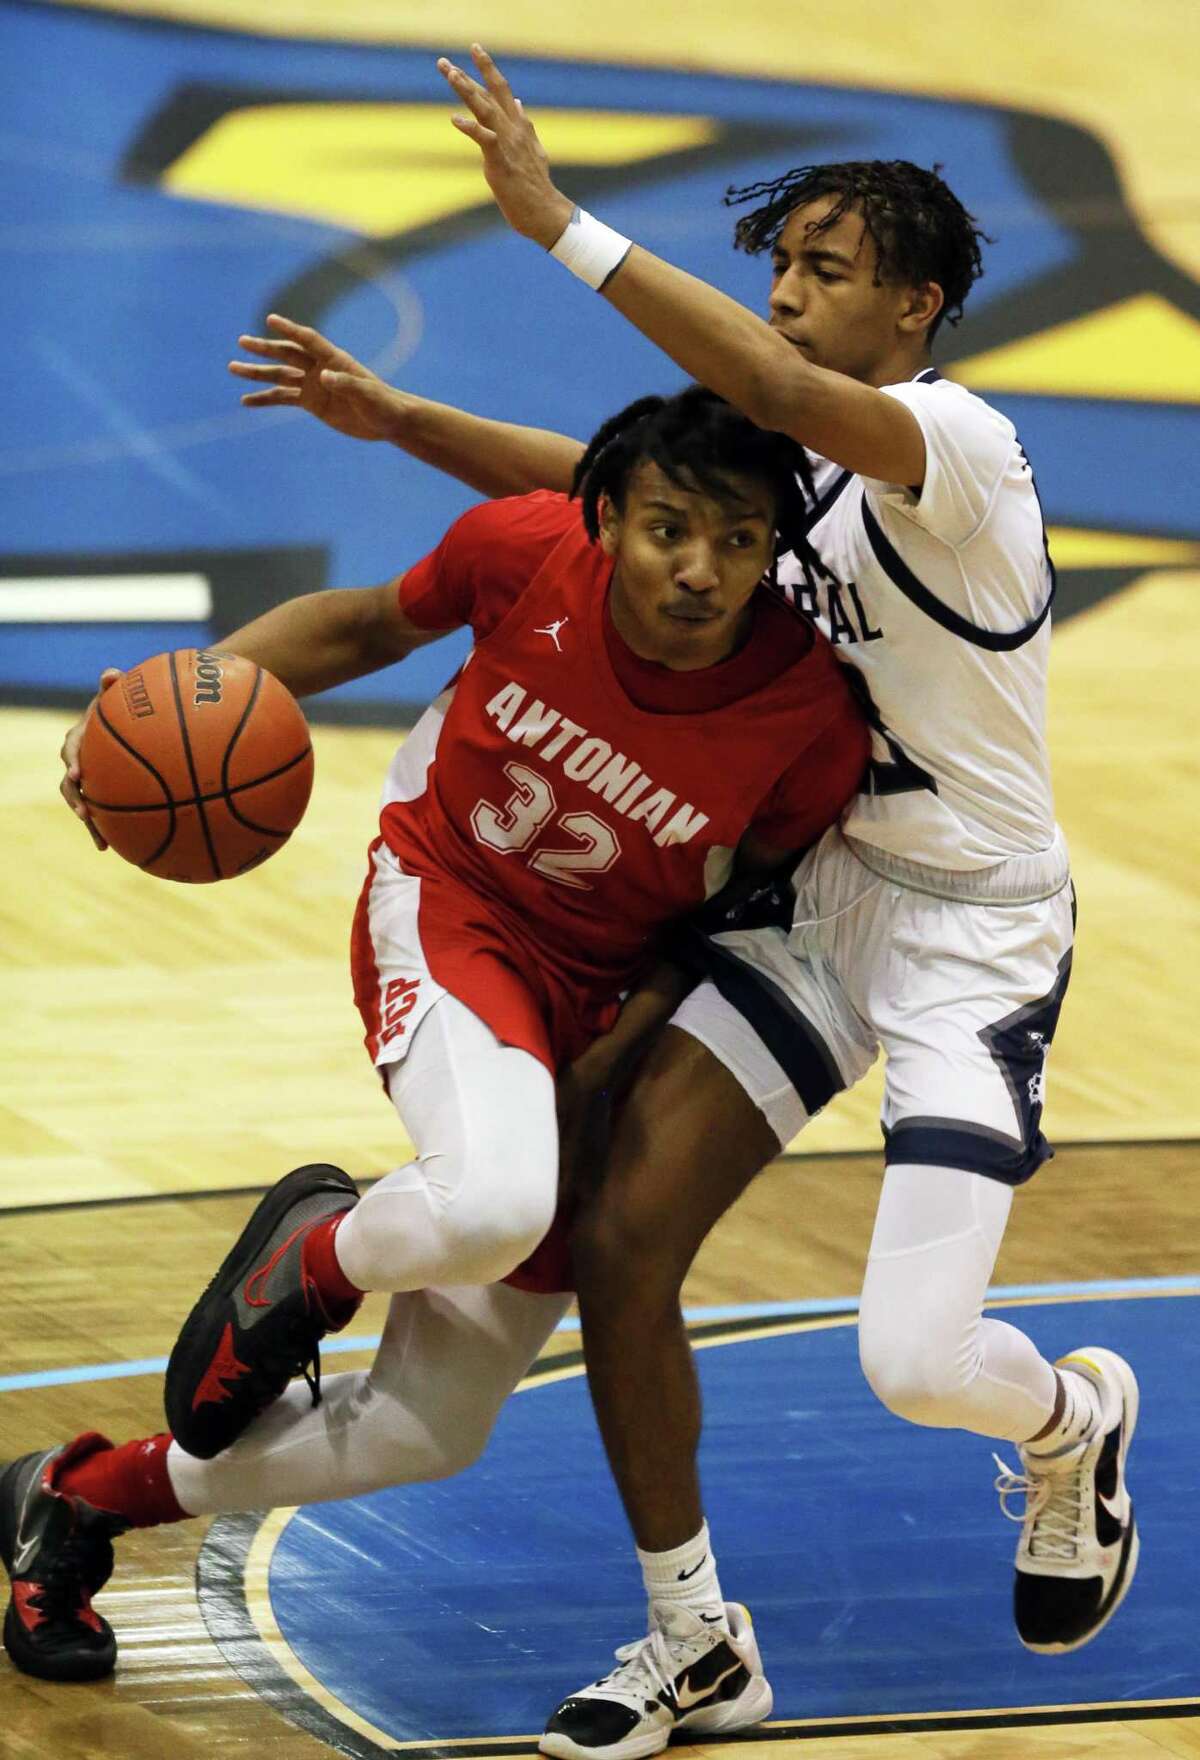 Antonian freshman Isaiah Fox (32) drives to the basket during the TAPPS 3-6A basketball game against Central Catholic Saturday, Feb. 5, 2022, at Bill Greehey Arena in San Antonio, Texas. [Sam Grenadier/San Antonio Express-News]